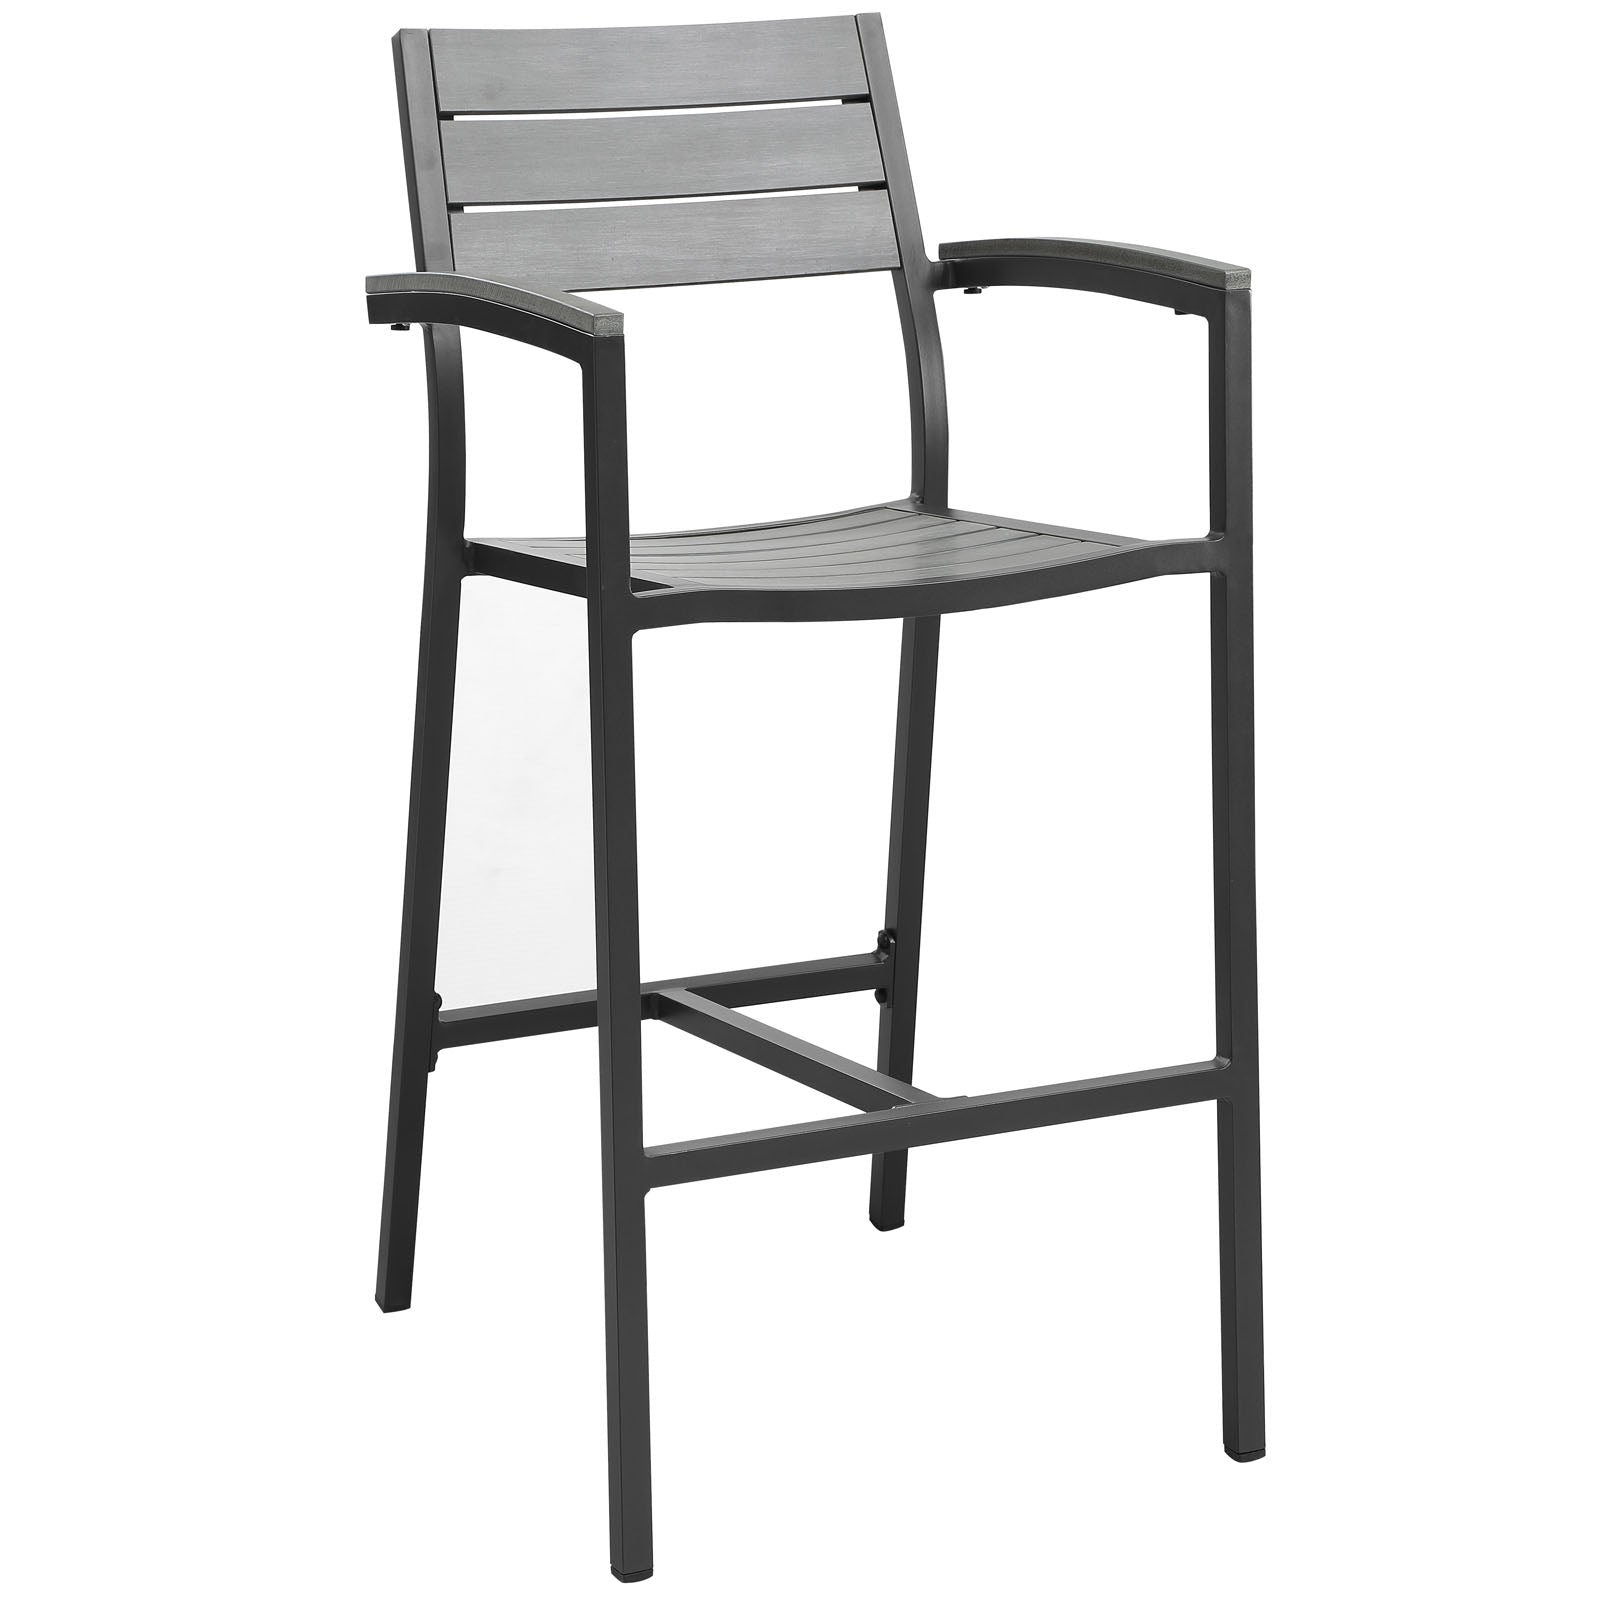 Modway Outdoor Barstools - Maine Bar Stool Outdoor Patio Brown & Gray (Set Of 2)